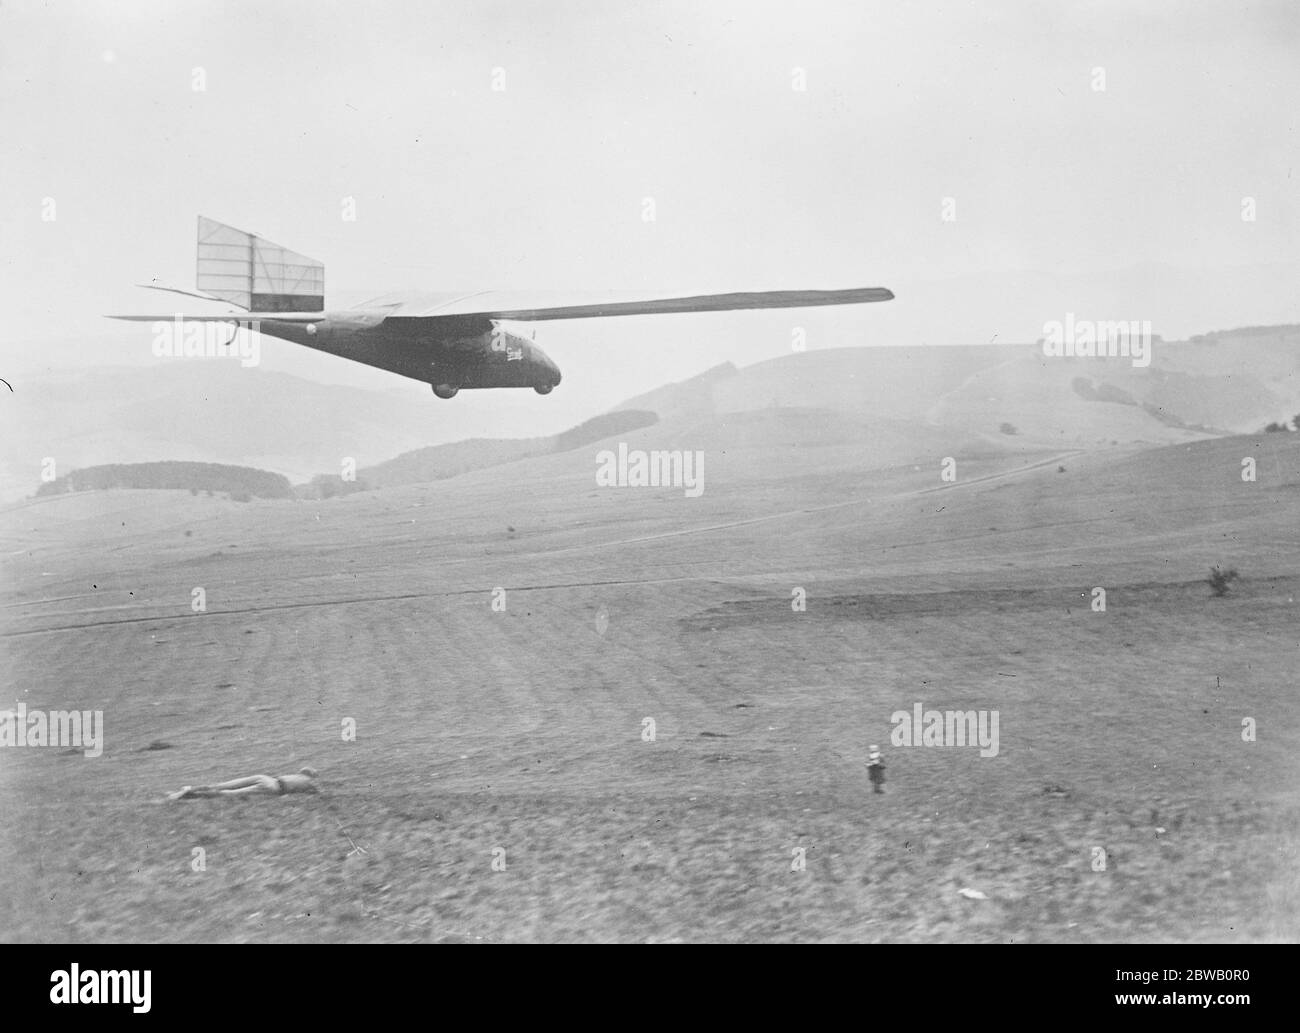 German War Pilot as World 's Champion Glider £ 9000 Offered for His Machine The German airman Hentzen , became the world ' s champion glider by remaining in the air for over two hours at a motorless aviation meeting on Rhon Wasserkuppe 25 August 1922 Stock Photo